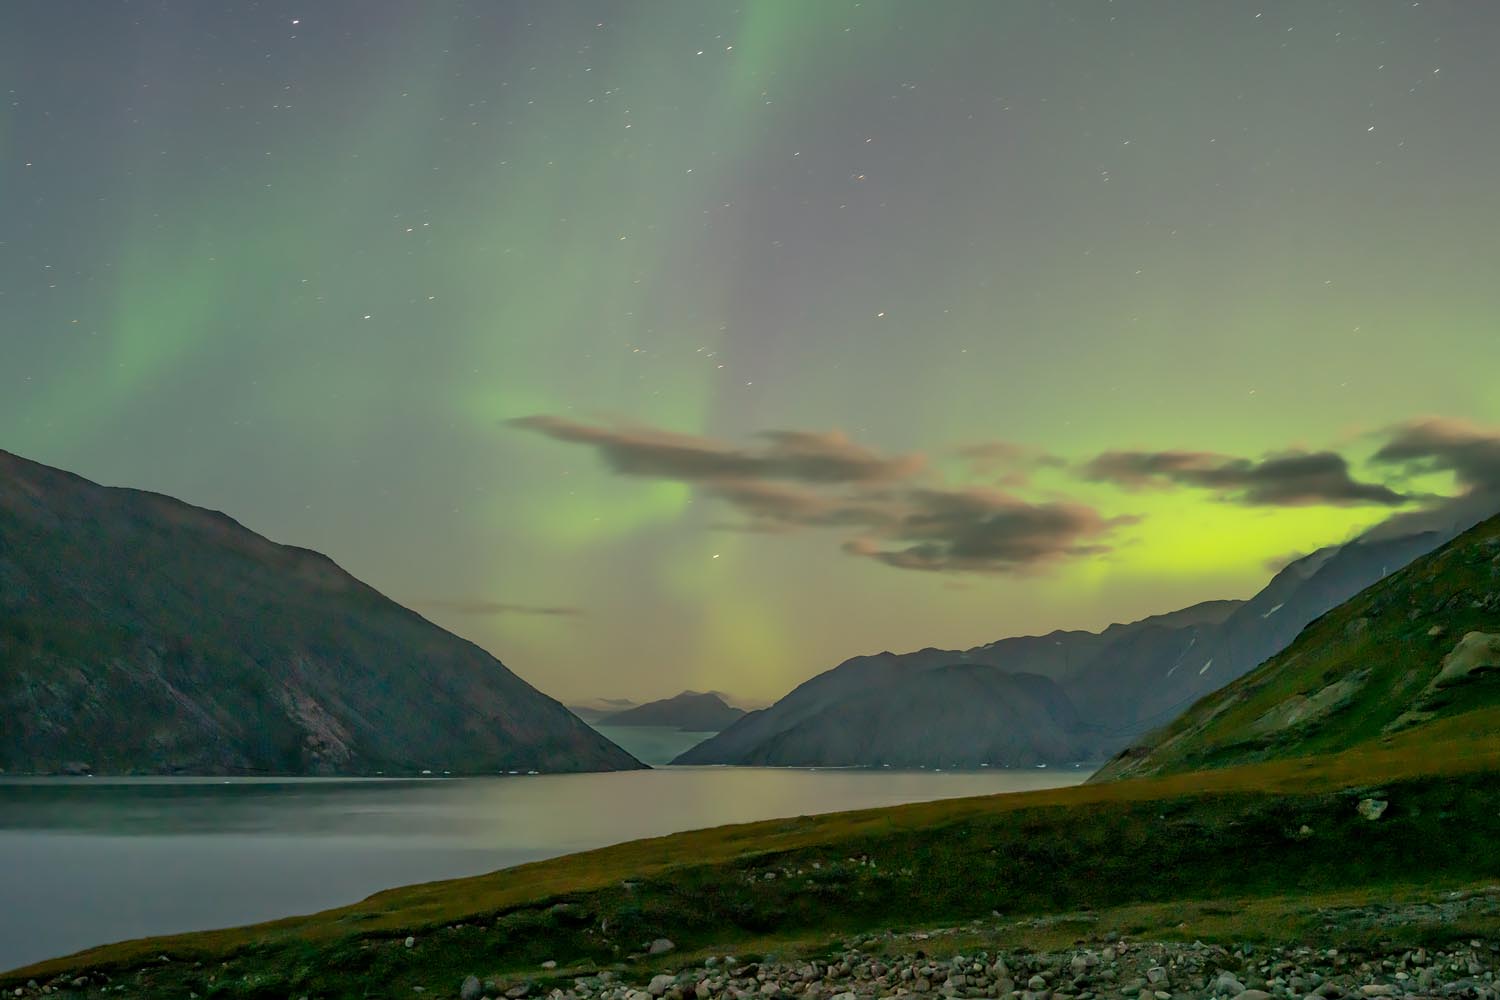 Shadow and Light: New Night Landscape Photographs of Greenland By Steve Giovinco. Strange Light Over Fjord